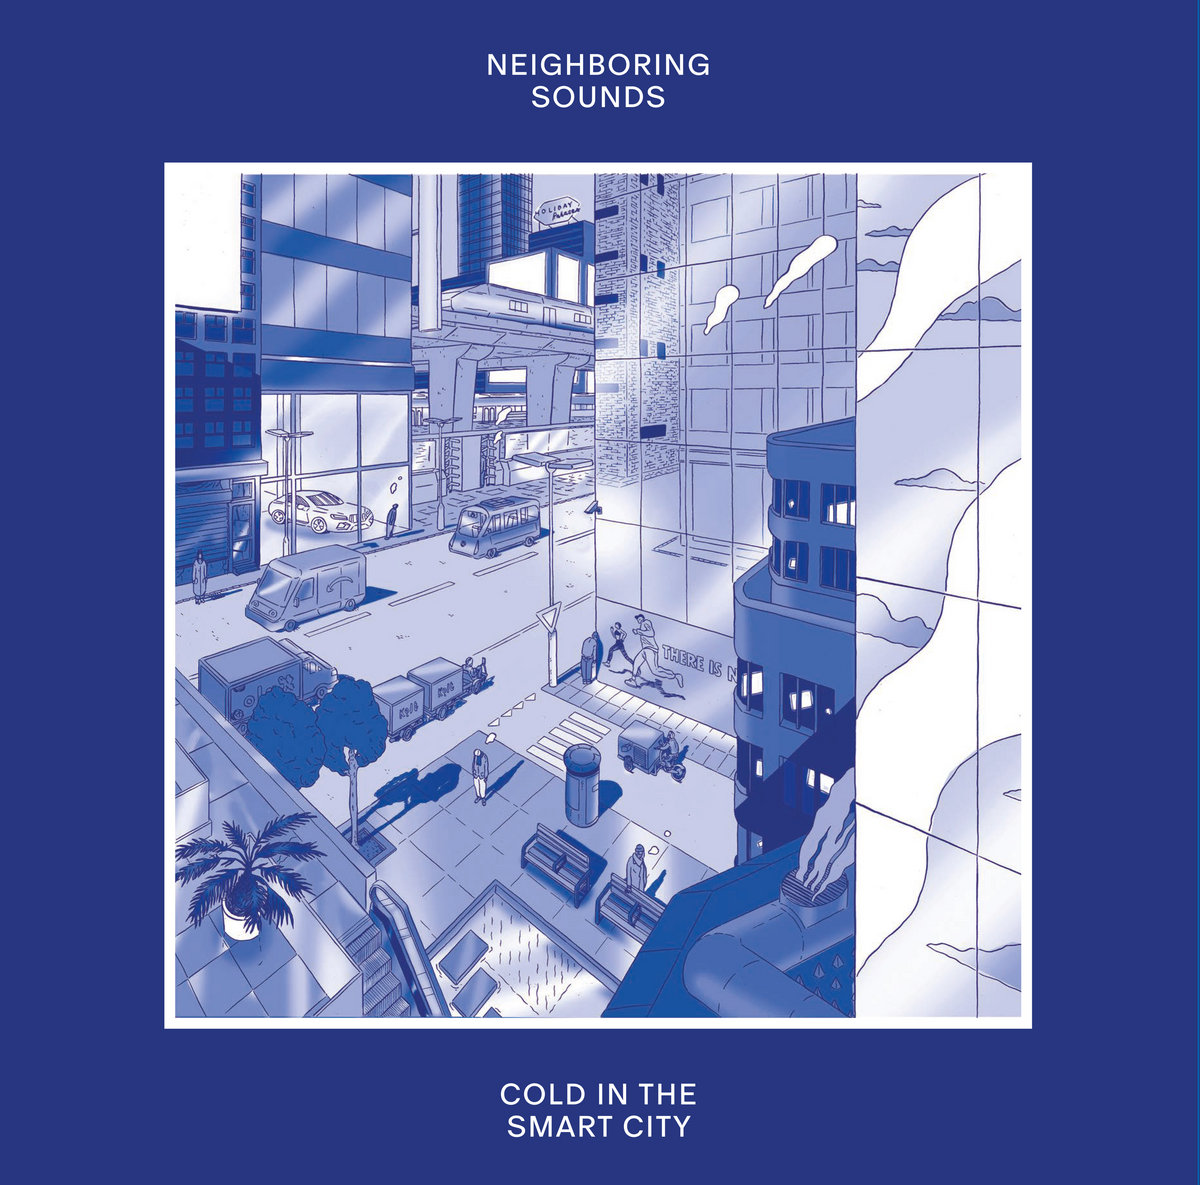 Neighboring Sounds "Cold in the smart city" LP